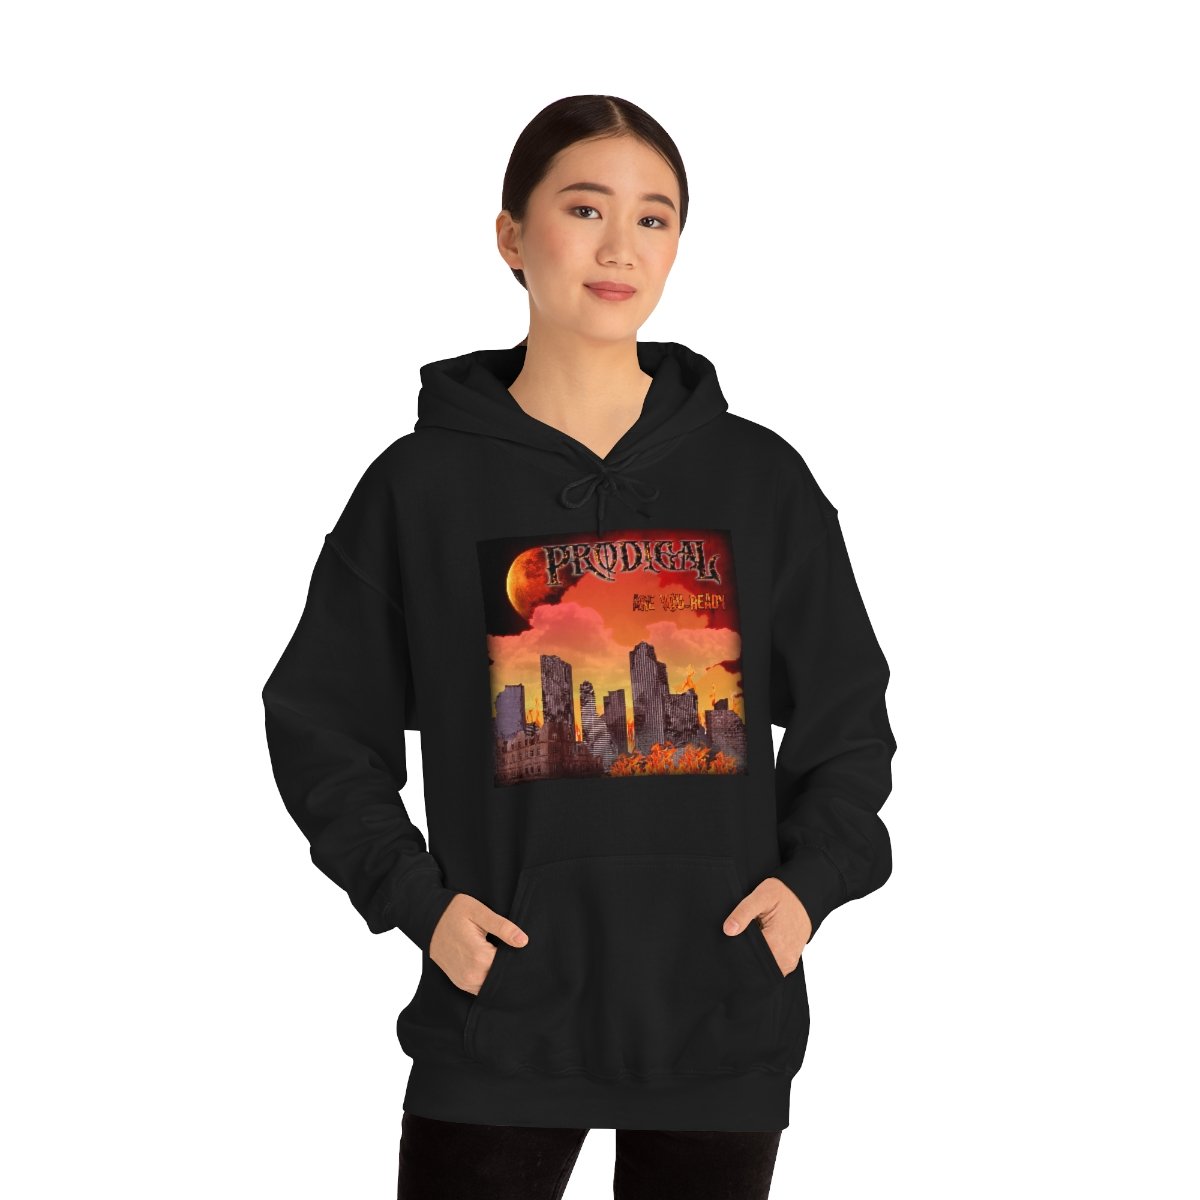 Prodigal – Are You Ready? Pullover Hooded Sweatshirt (18500)